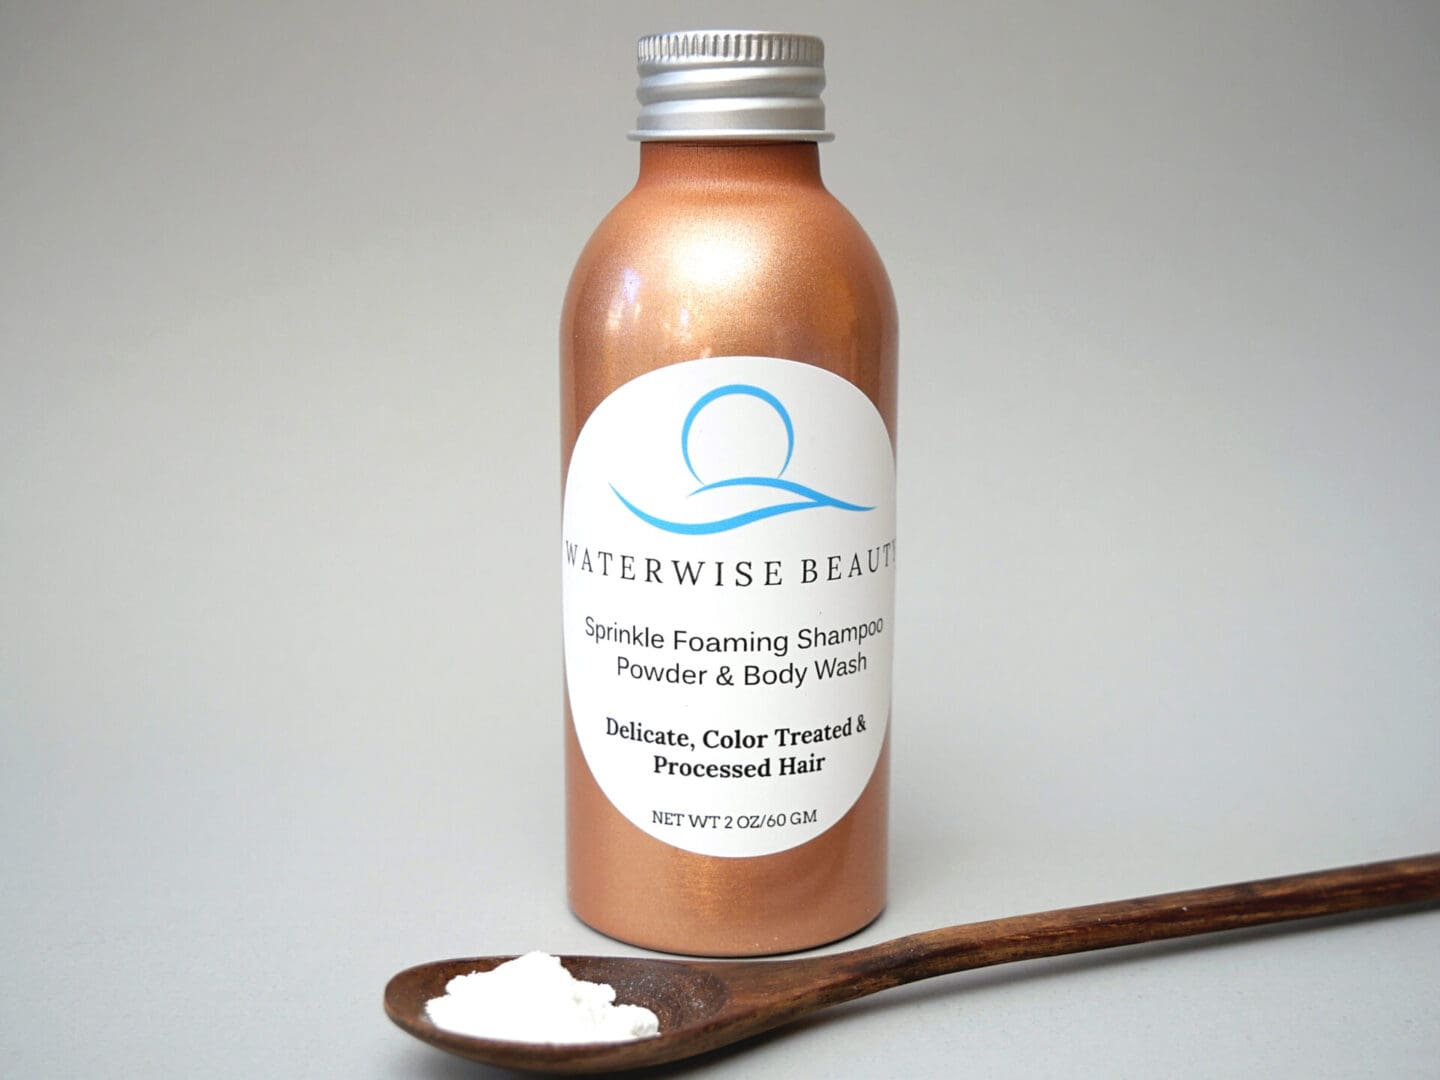 A bottle of Sprinkle Foaming Shampoo Powder & Body Wash for Delicate, Color Treated & Processed Hair next to a wooden spoon.